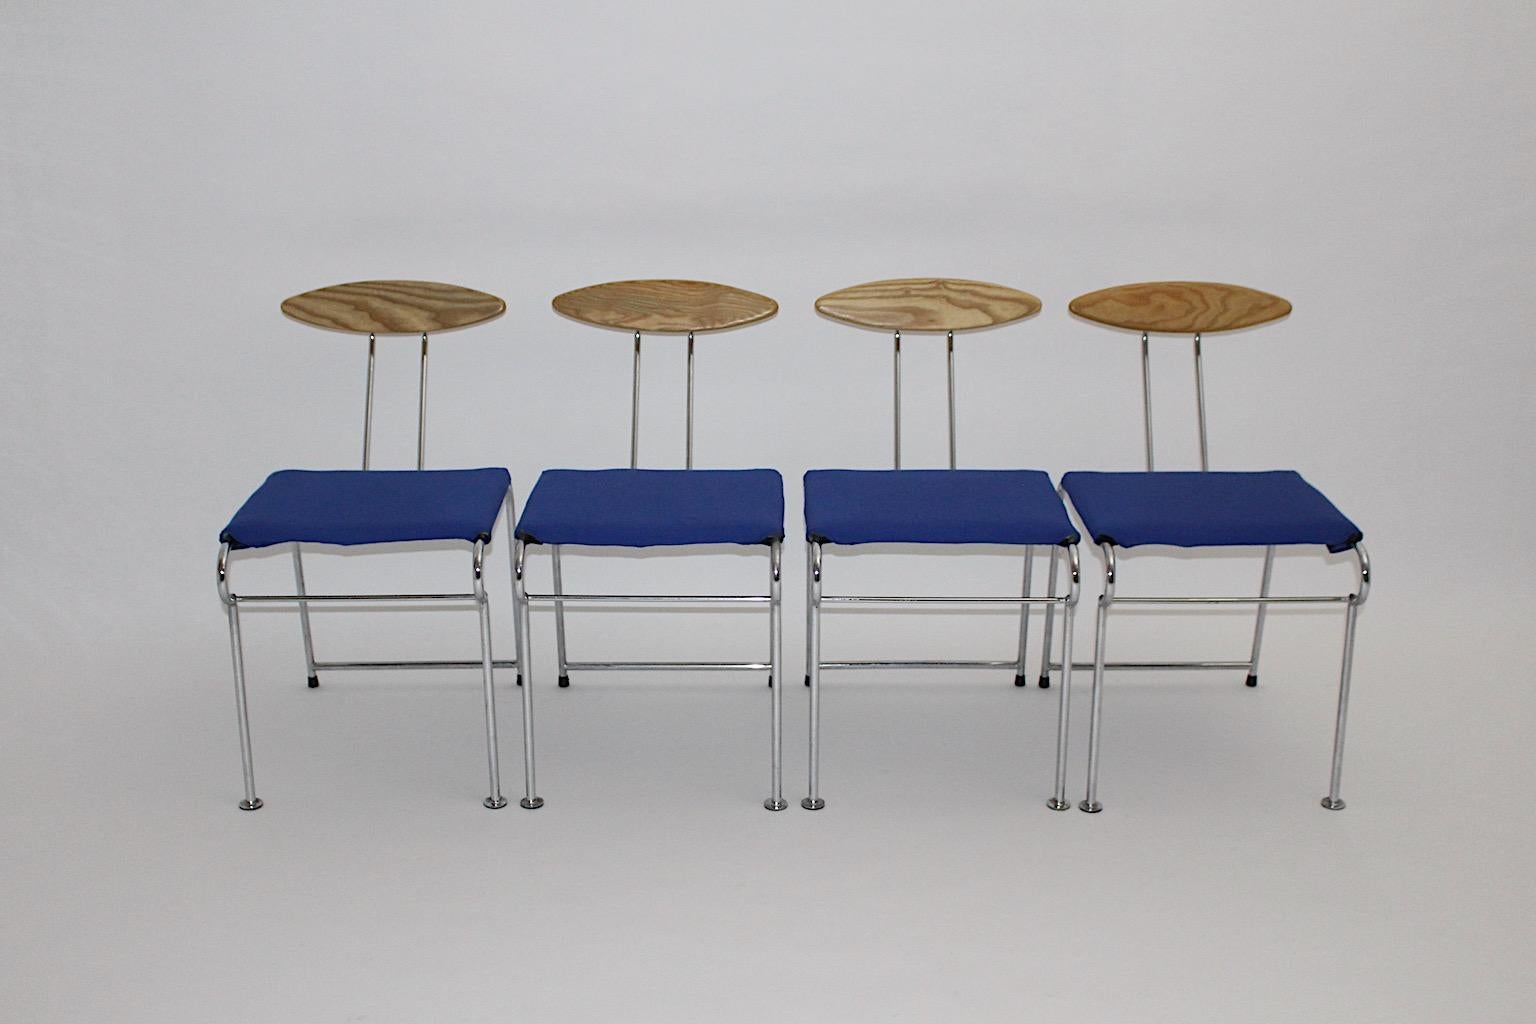 Postmodern Vintage Dining Room Set Massimo Iosa Ghini for Moroso c 1987 Italy In Good Condition For Sale In Vienna, AT